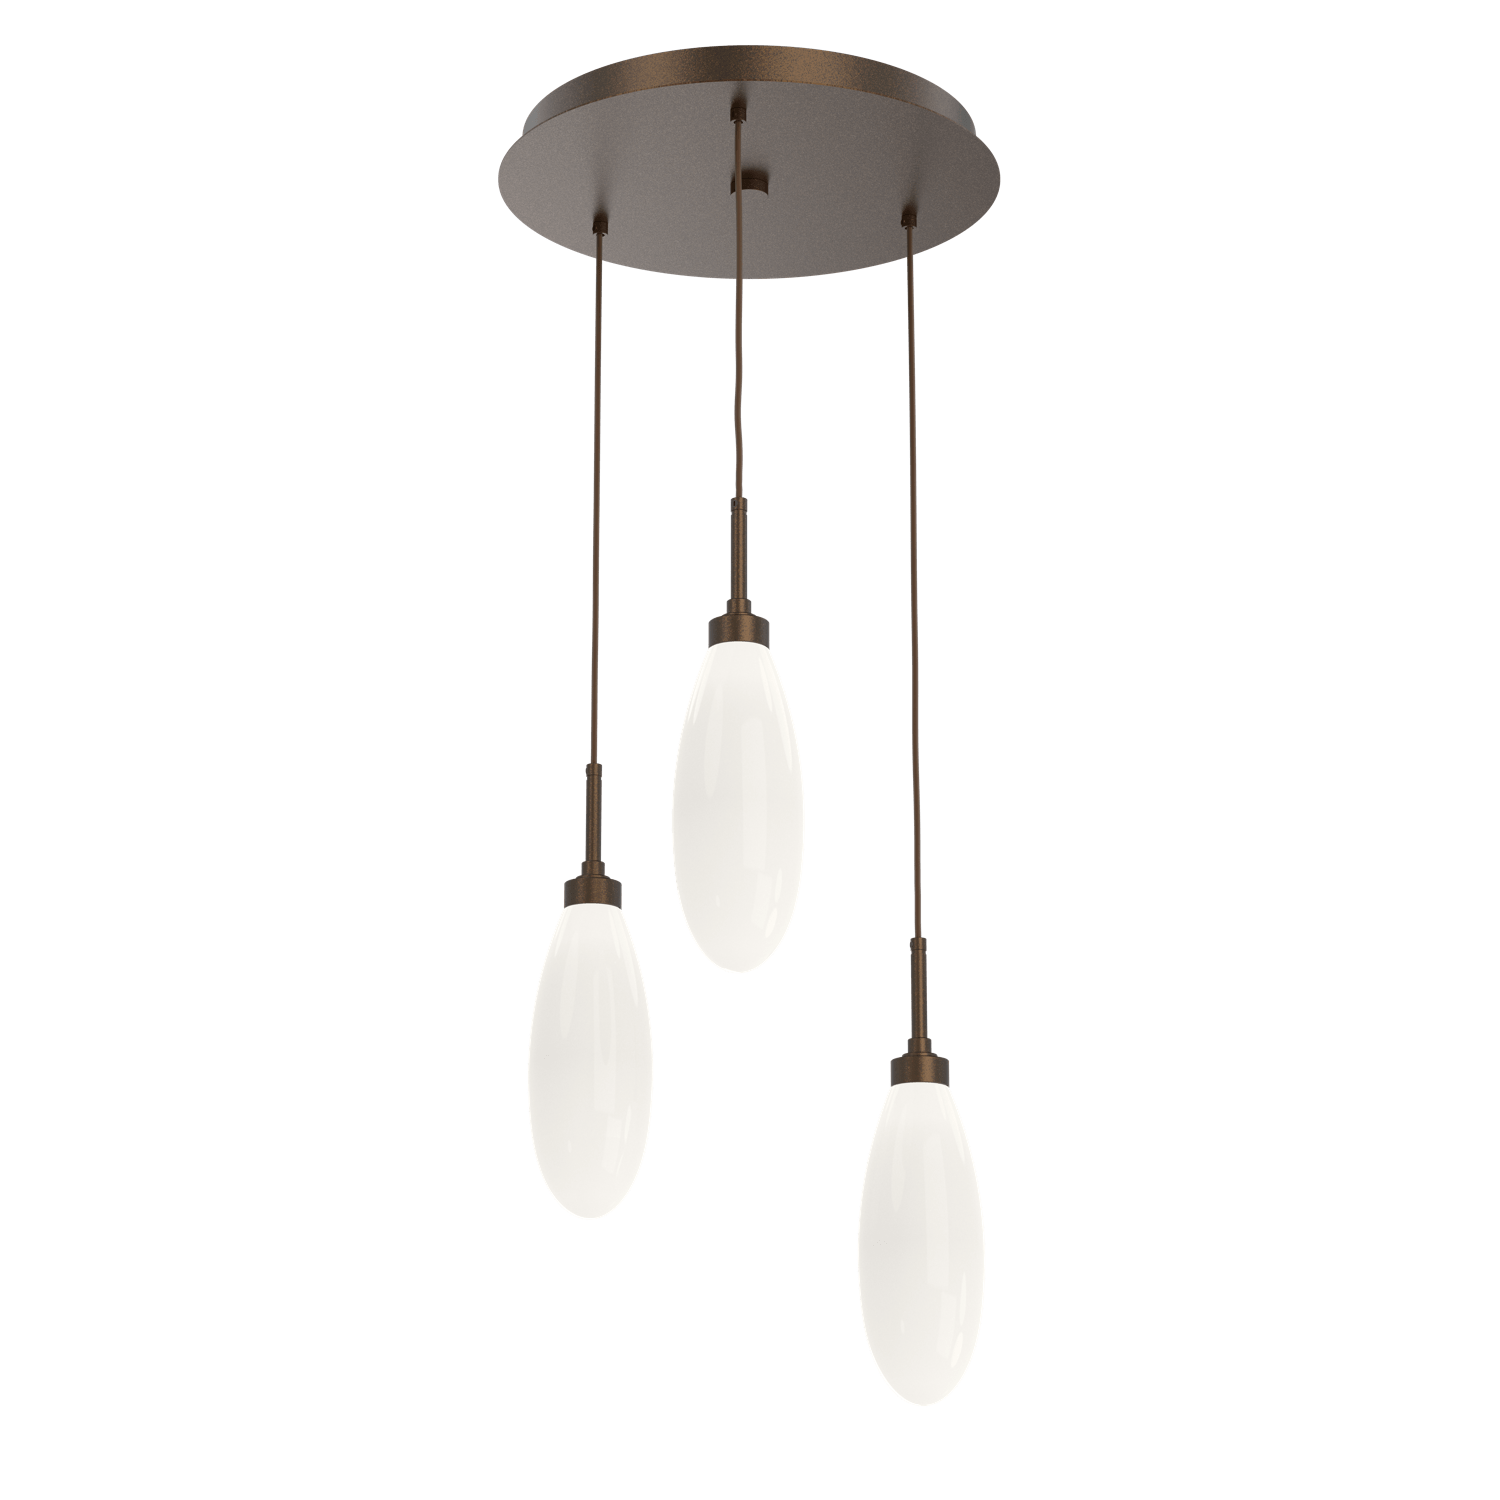 CHB0071-03-FB-WL-LL-Hammerton-Studio-Fiori-3-light-round-pendant-chandelier-with-flat-bronze-finish-and-opal-white-glass-shades-and-LED-lamping